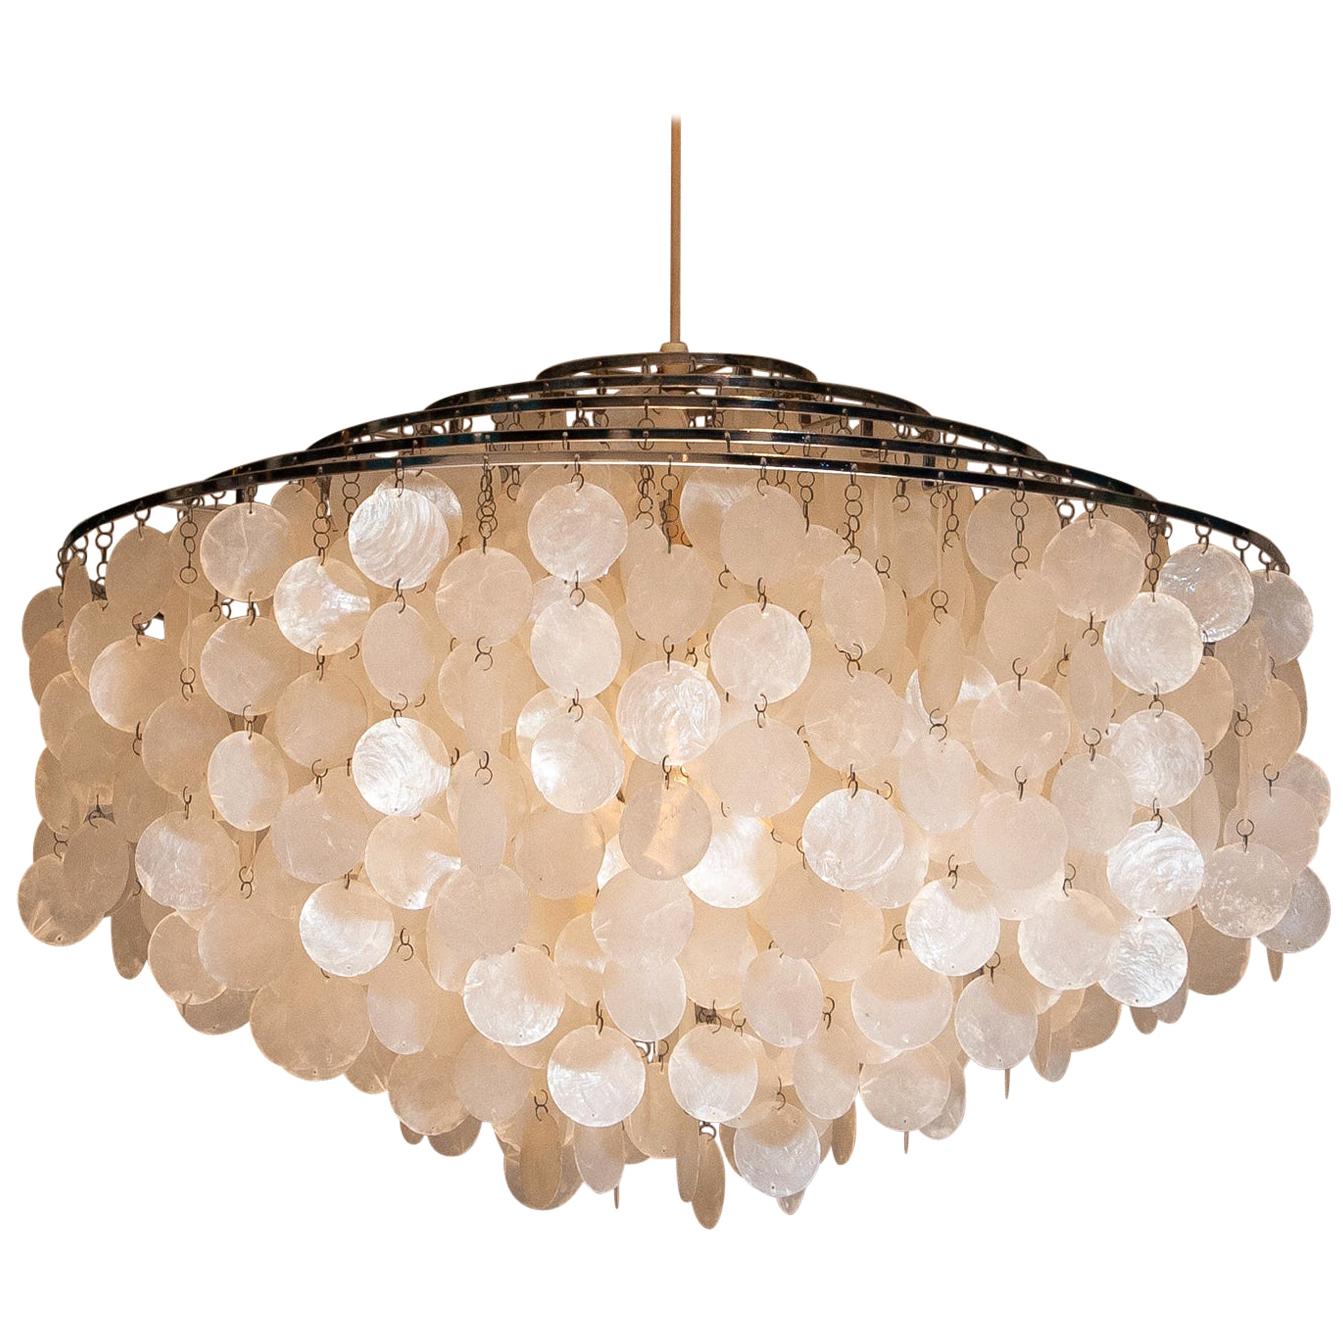 Beautiful and complete original extra-large capiz shell chandelier designed by Verner Panton for J. Luber Ag in Switzerland, 1964.
This extra large chandelier measures a diameter of 70cm. or 27.56